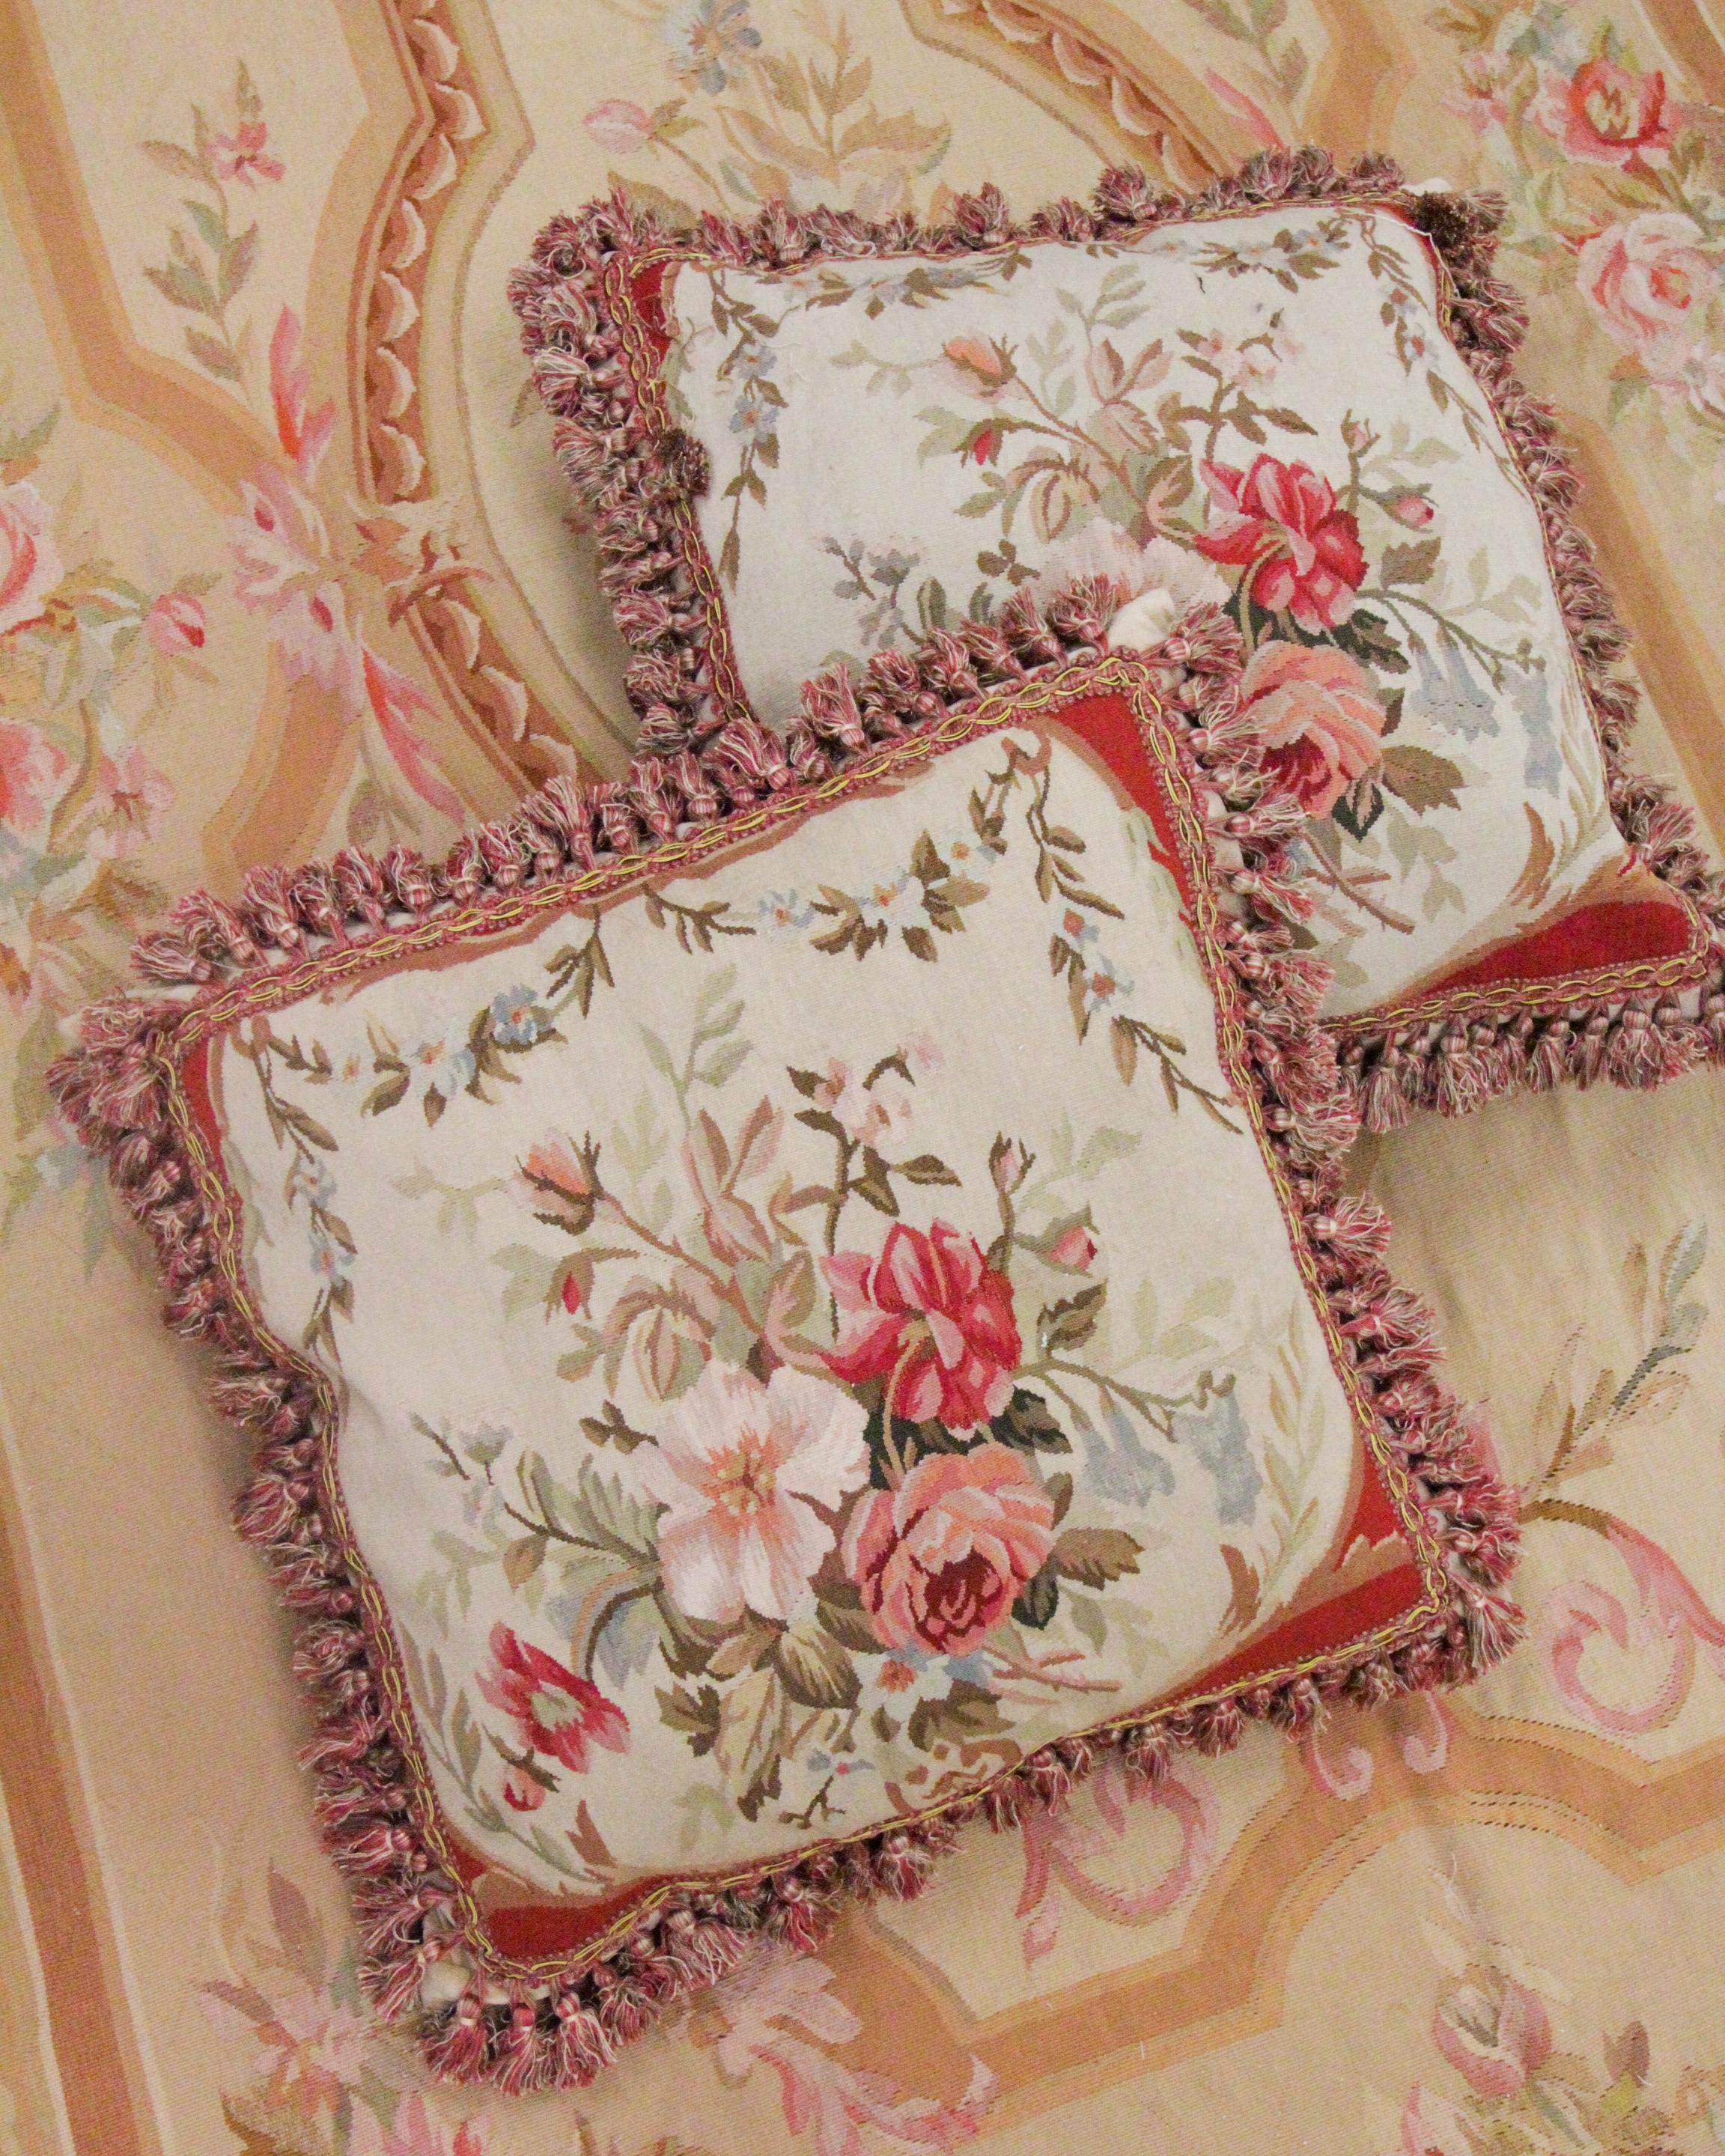 This elegant wool cushion cover is a beautiful accessory that has been delicately woven by hand with fine hand-spun wool and cotton. The central design reveals a graceful floral design with pink, red, brown, and green accents. The rug's edges have